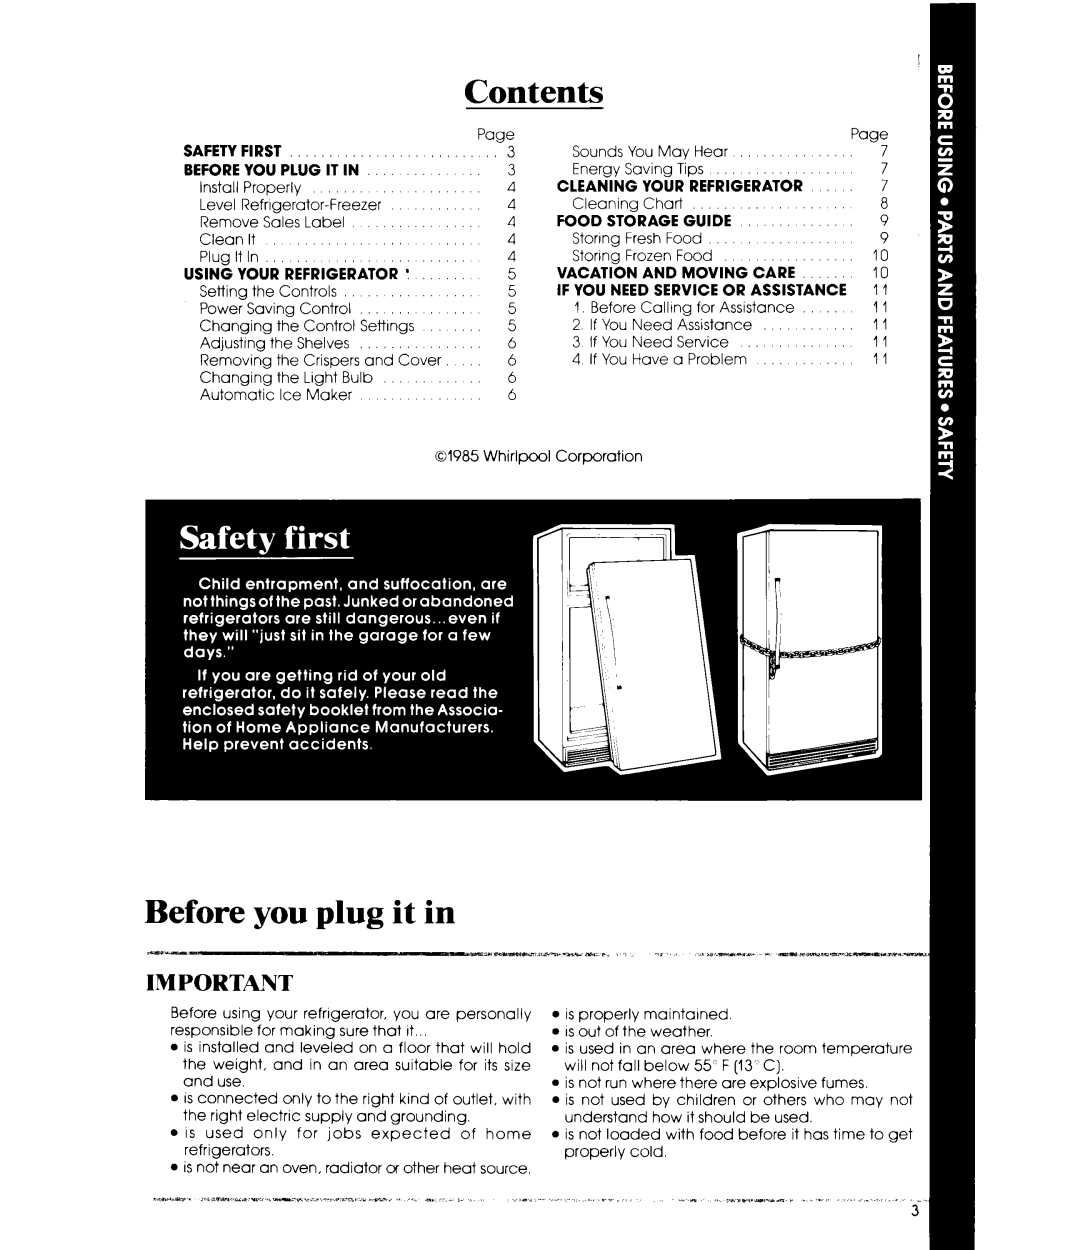 Whirlpool ETIGJM manual Contents, Before you plug it in 